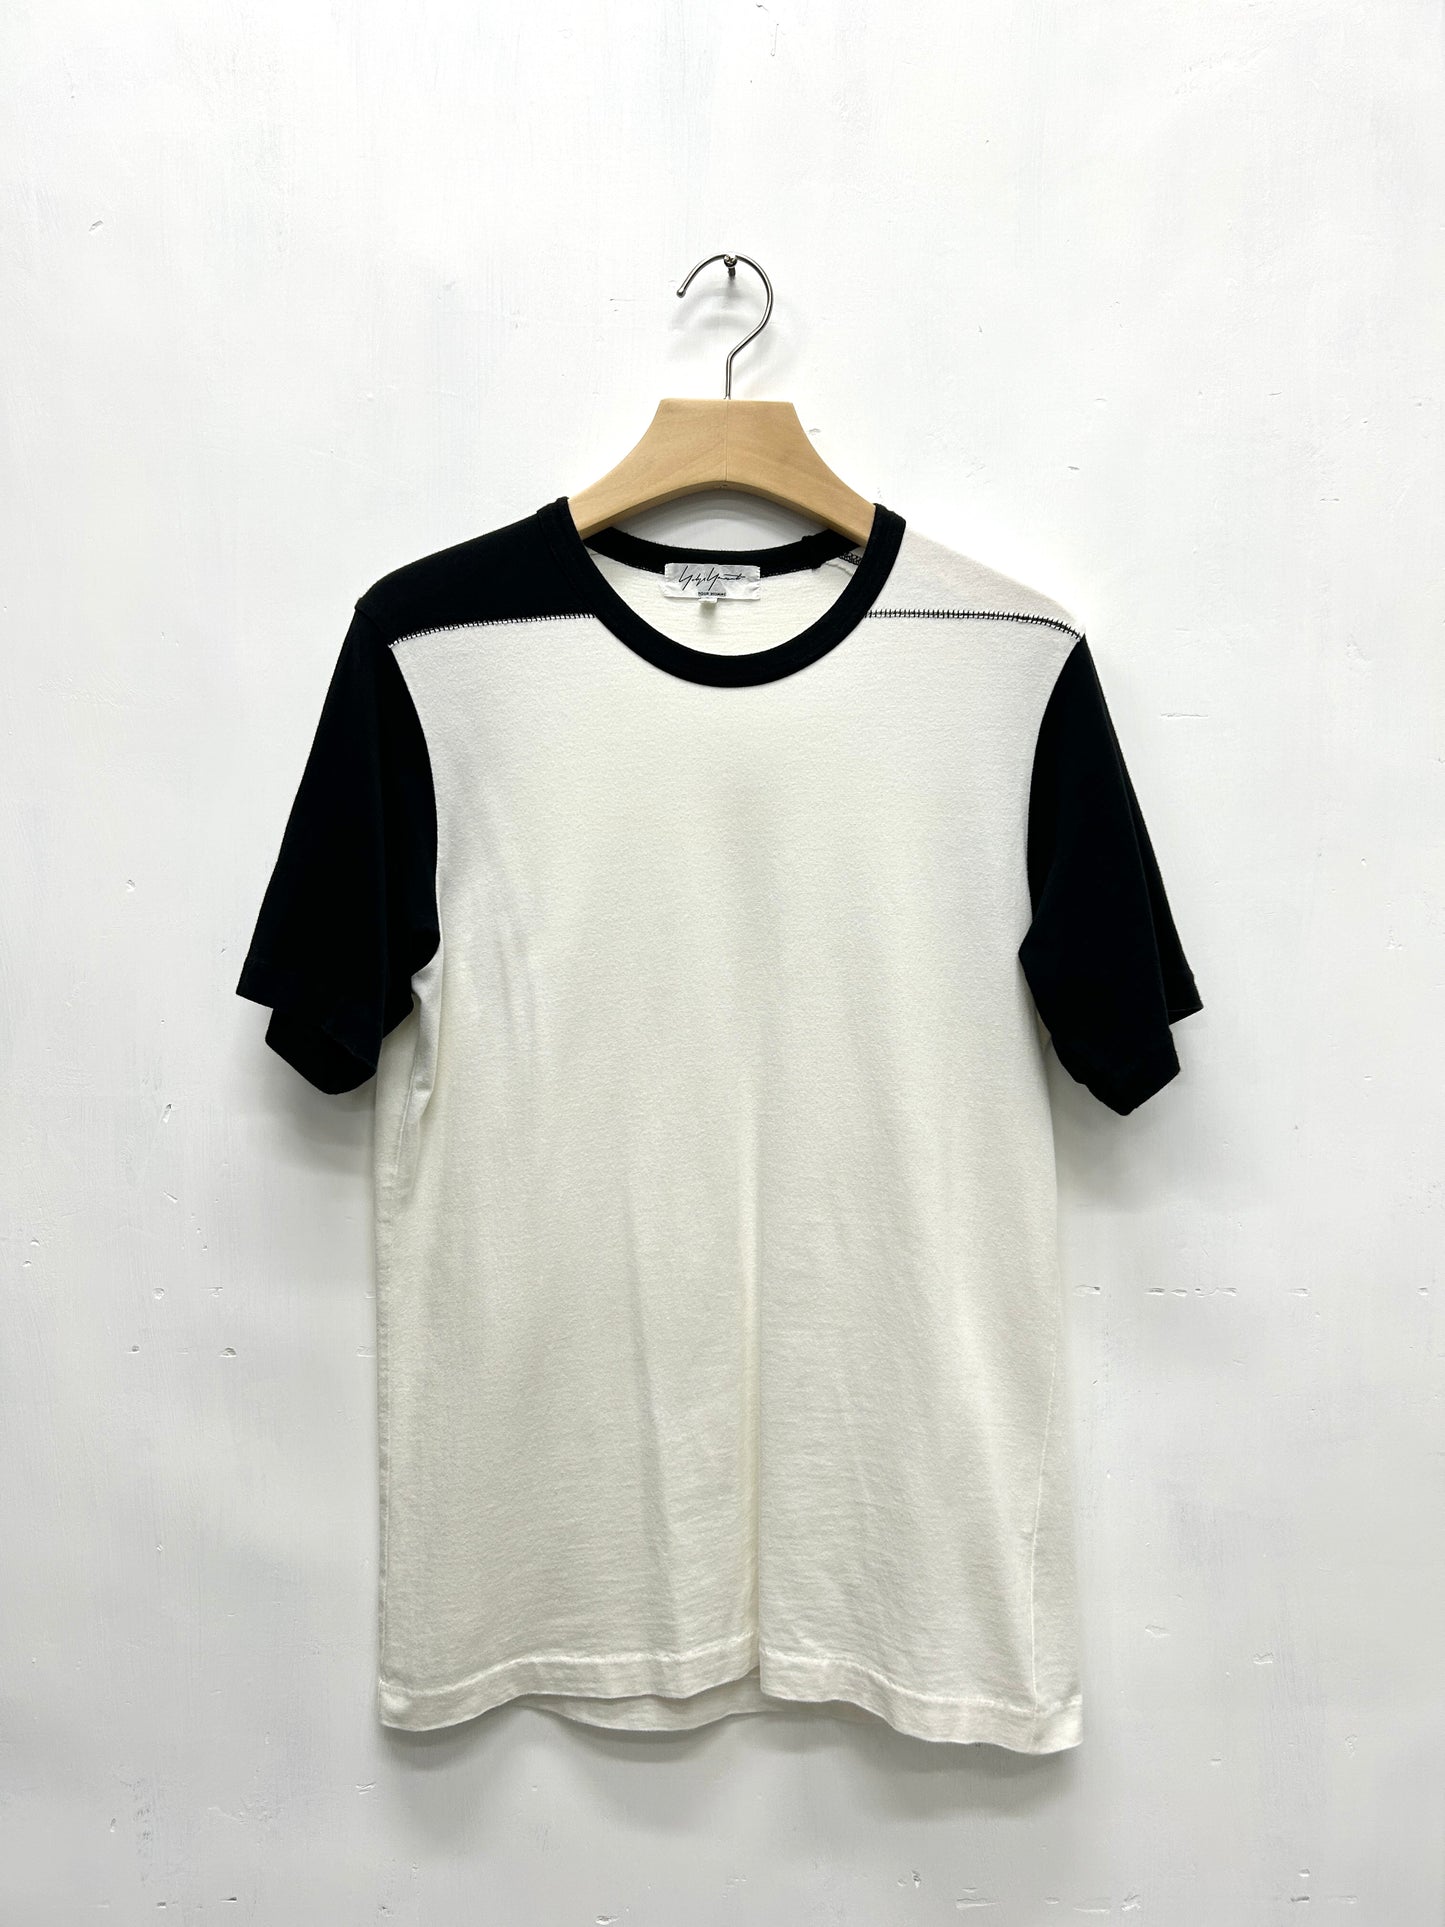 Yohji Yamamoto Pour Homme SS08 Contrast Top Size 2